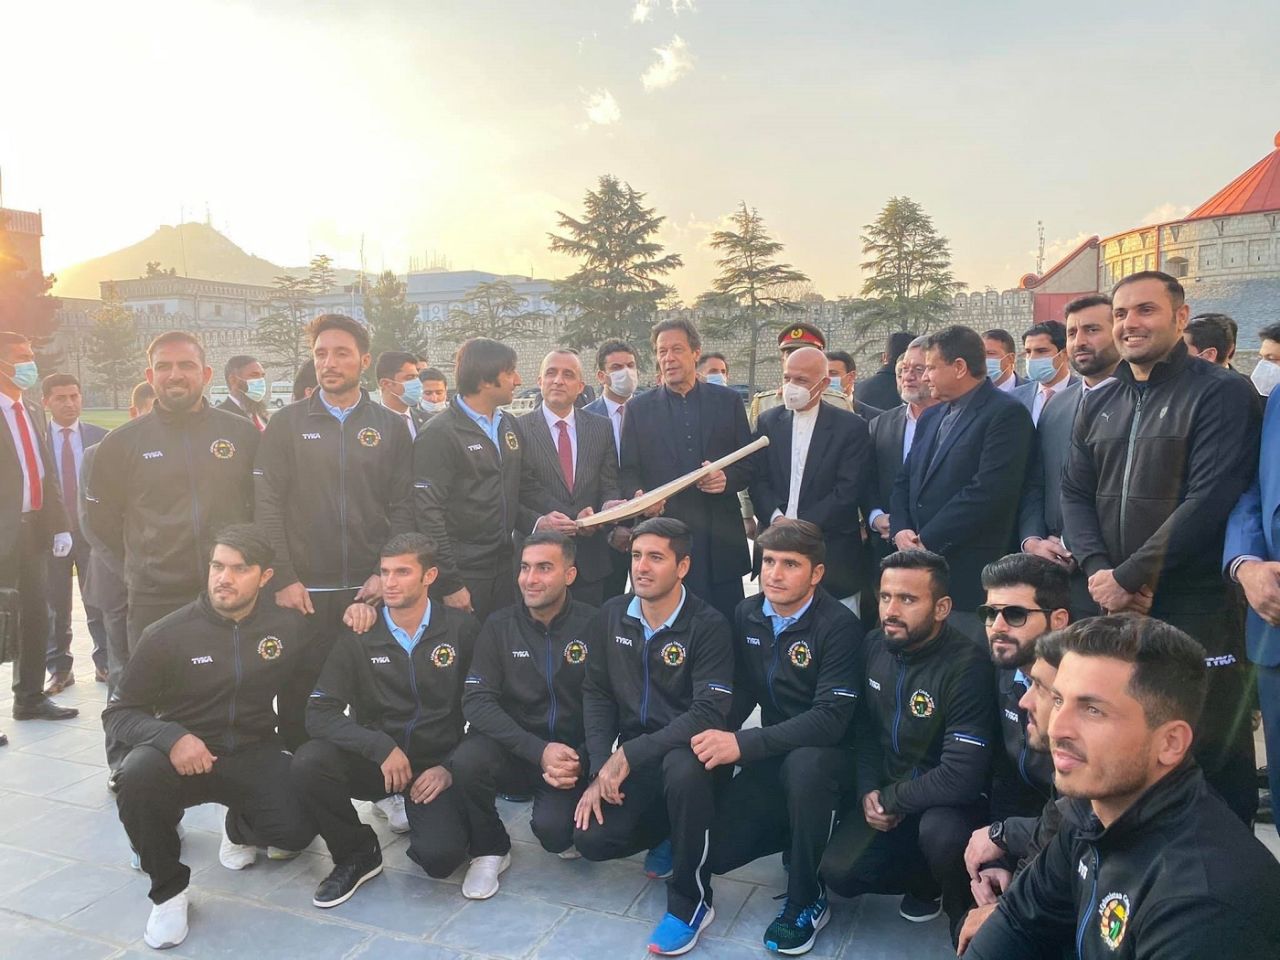 Imran Khan with members of the Afghanistan cricket team and ACB officials, Kabul, November 19, 2020